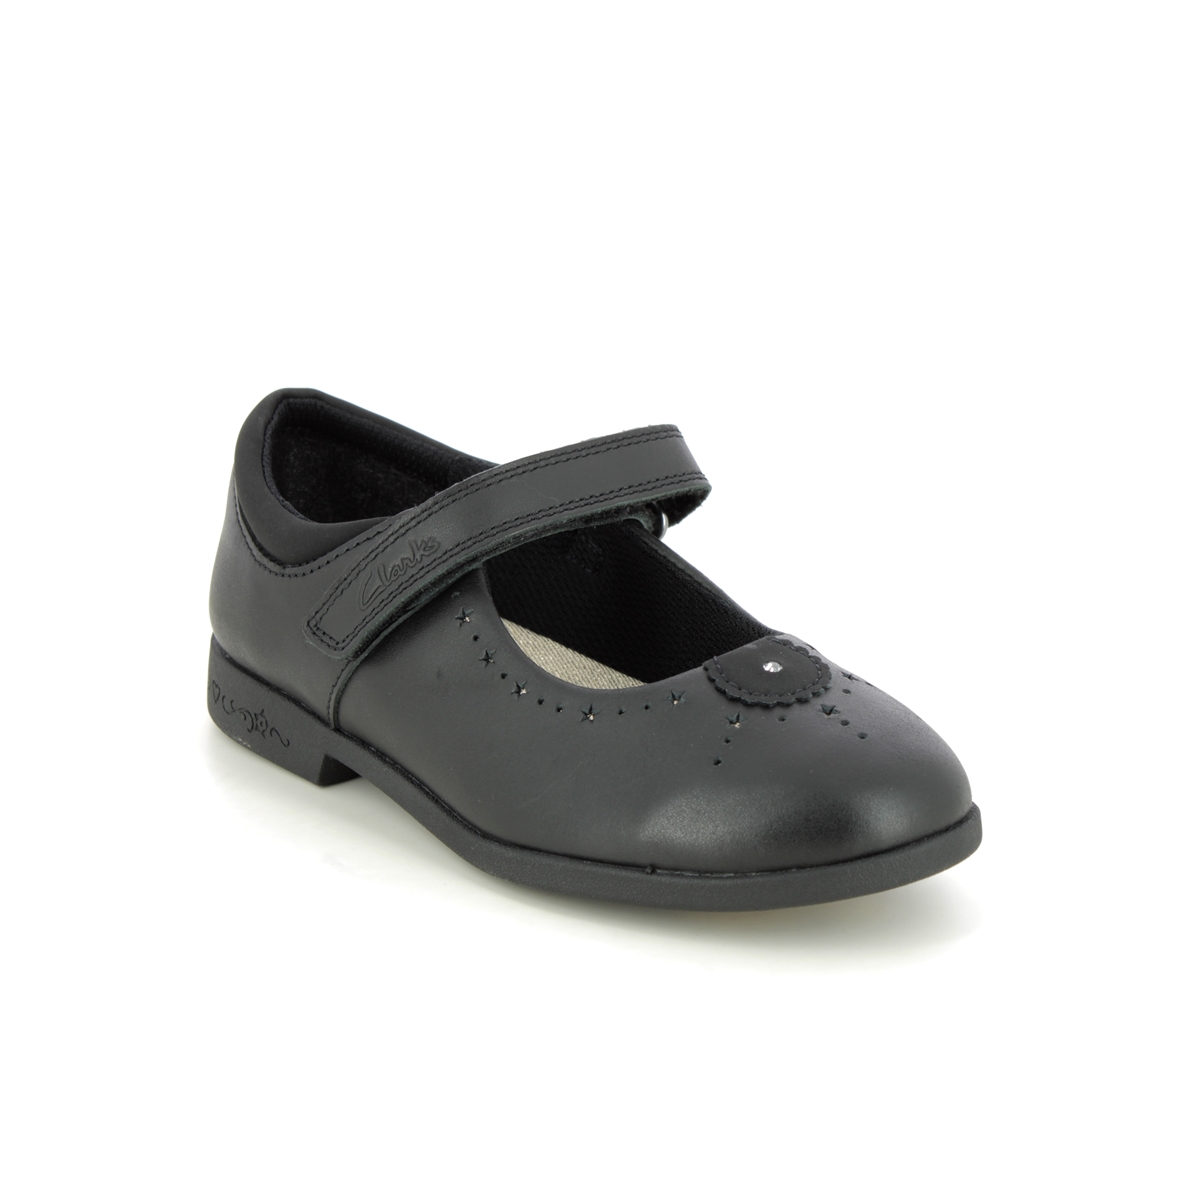 Clarks Magic Step Mj K Black leather Kids girls school shoes 6970-88H in a Plain Leather in Size 11